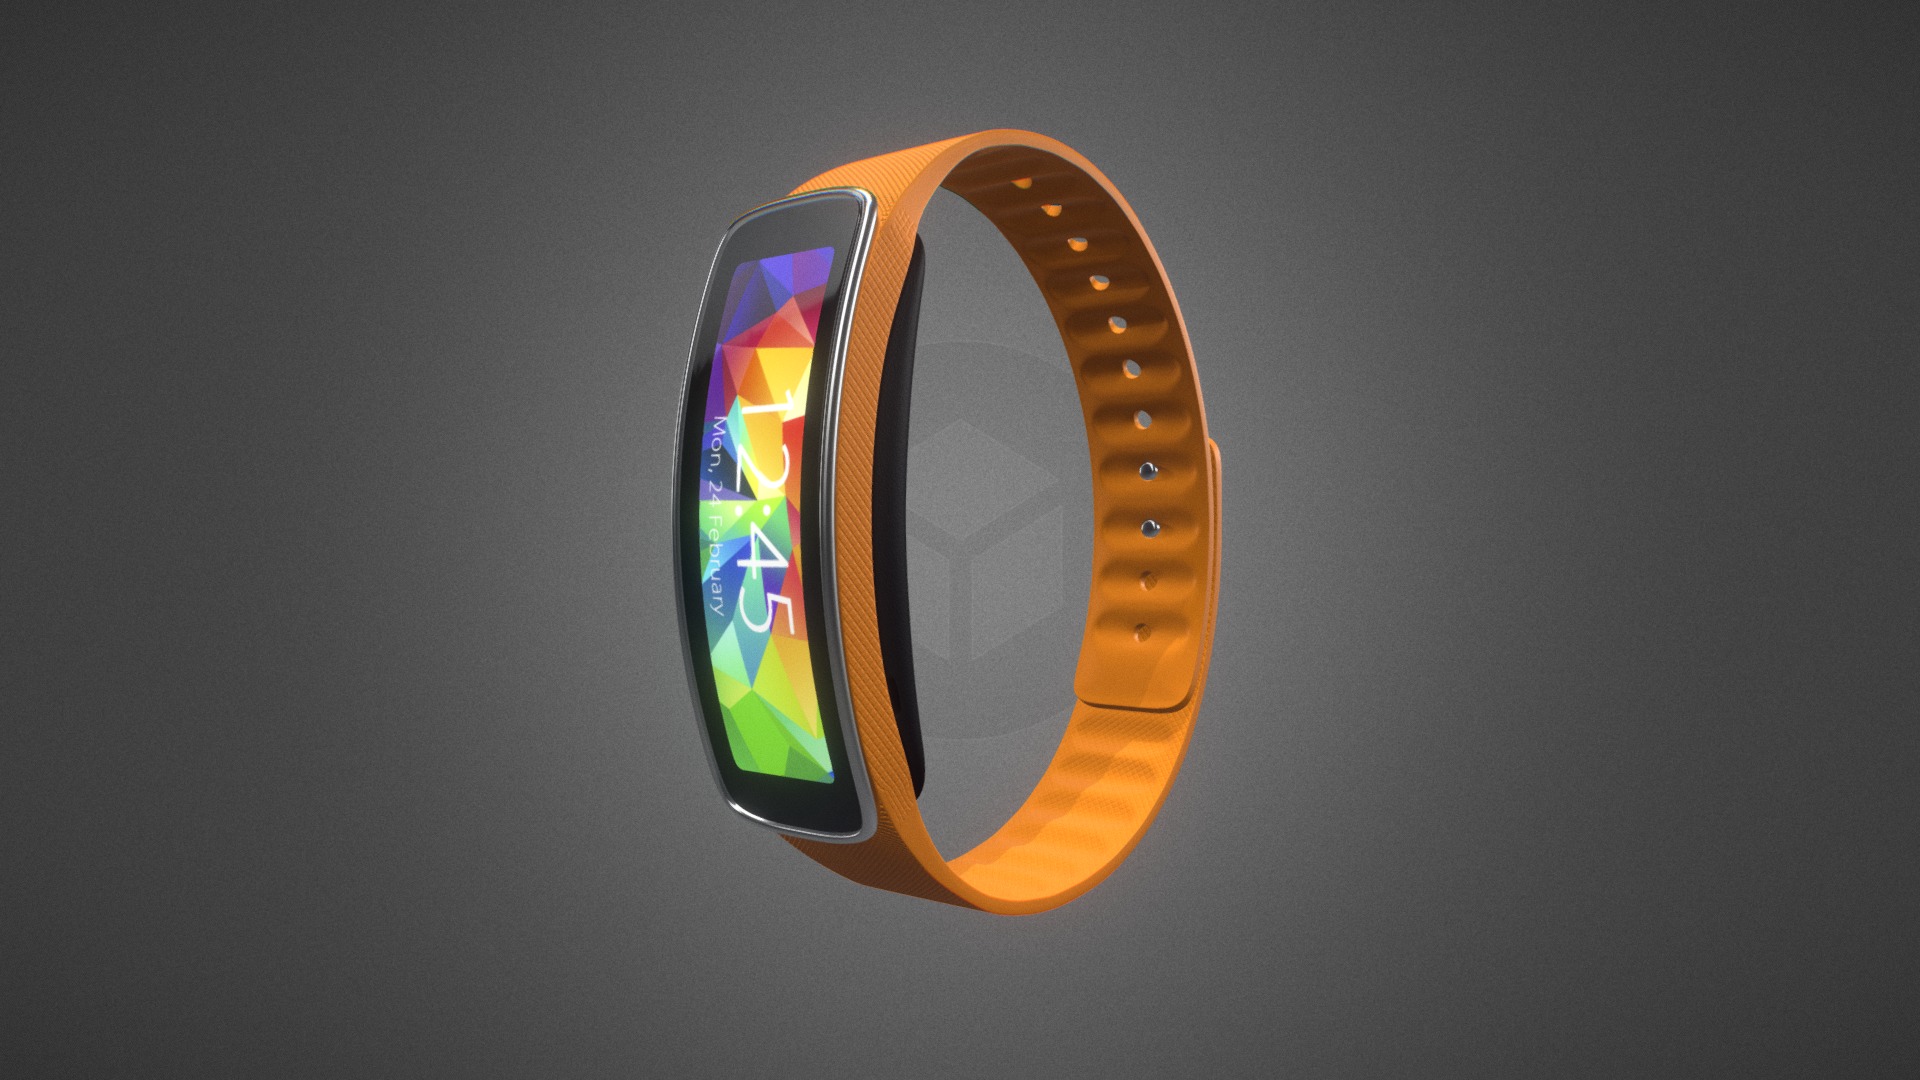 3D model Samsung Gear Fit for Element 3D - This is a 3D model of the Samsung Gear Fit for Element 3D. The 3D model is about a circular object with a logo on it.